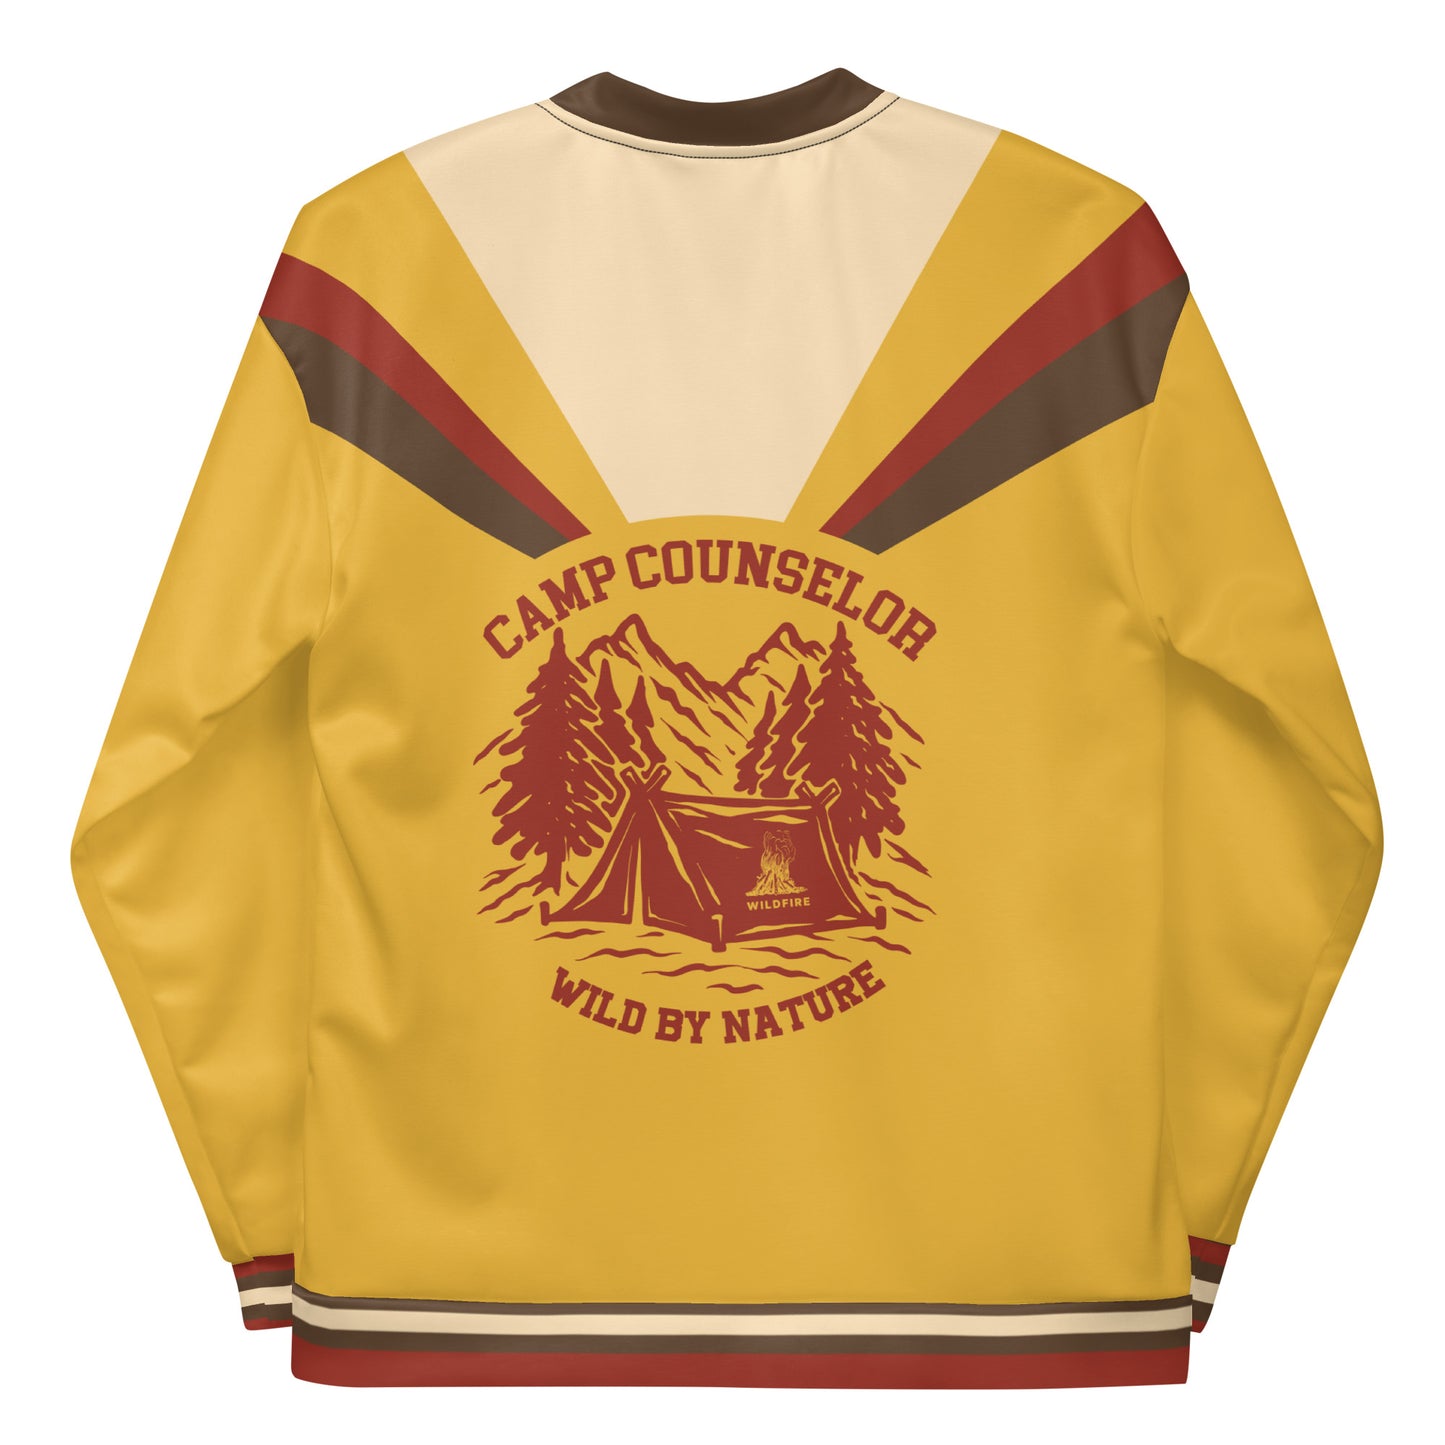 Wildfire Cigars all over printed light jacket in gold red brown and cream facing the back